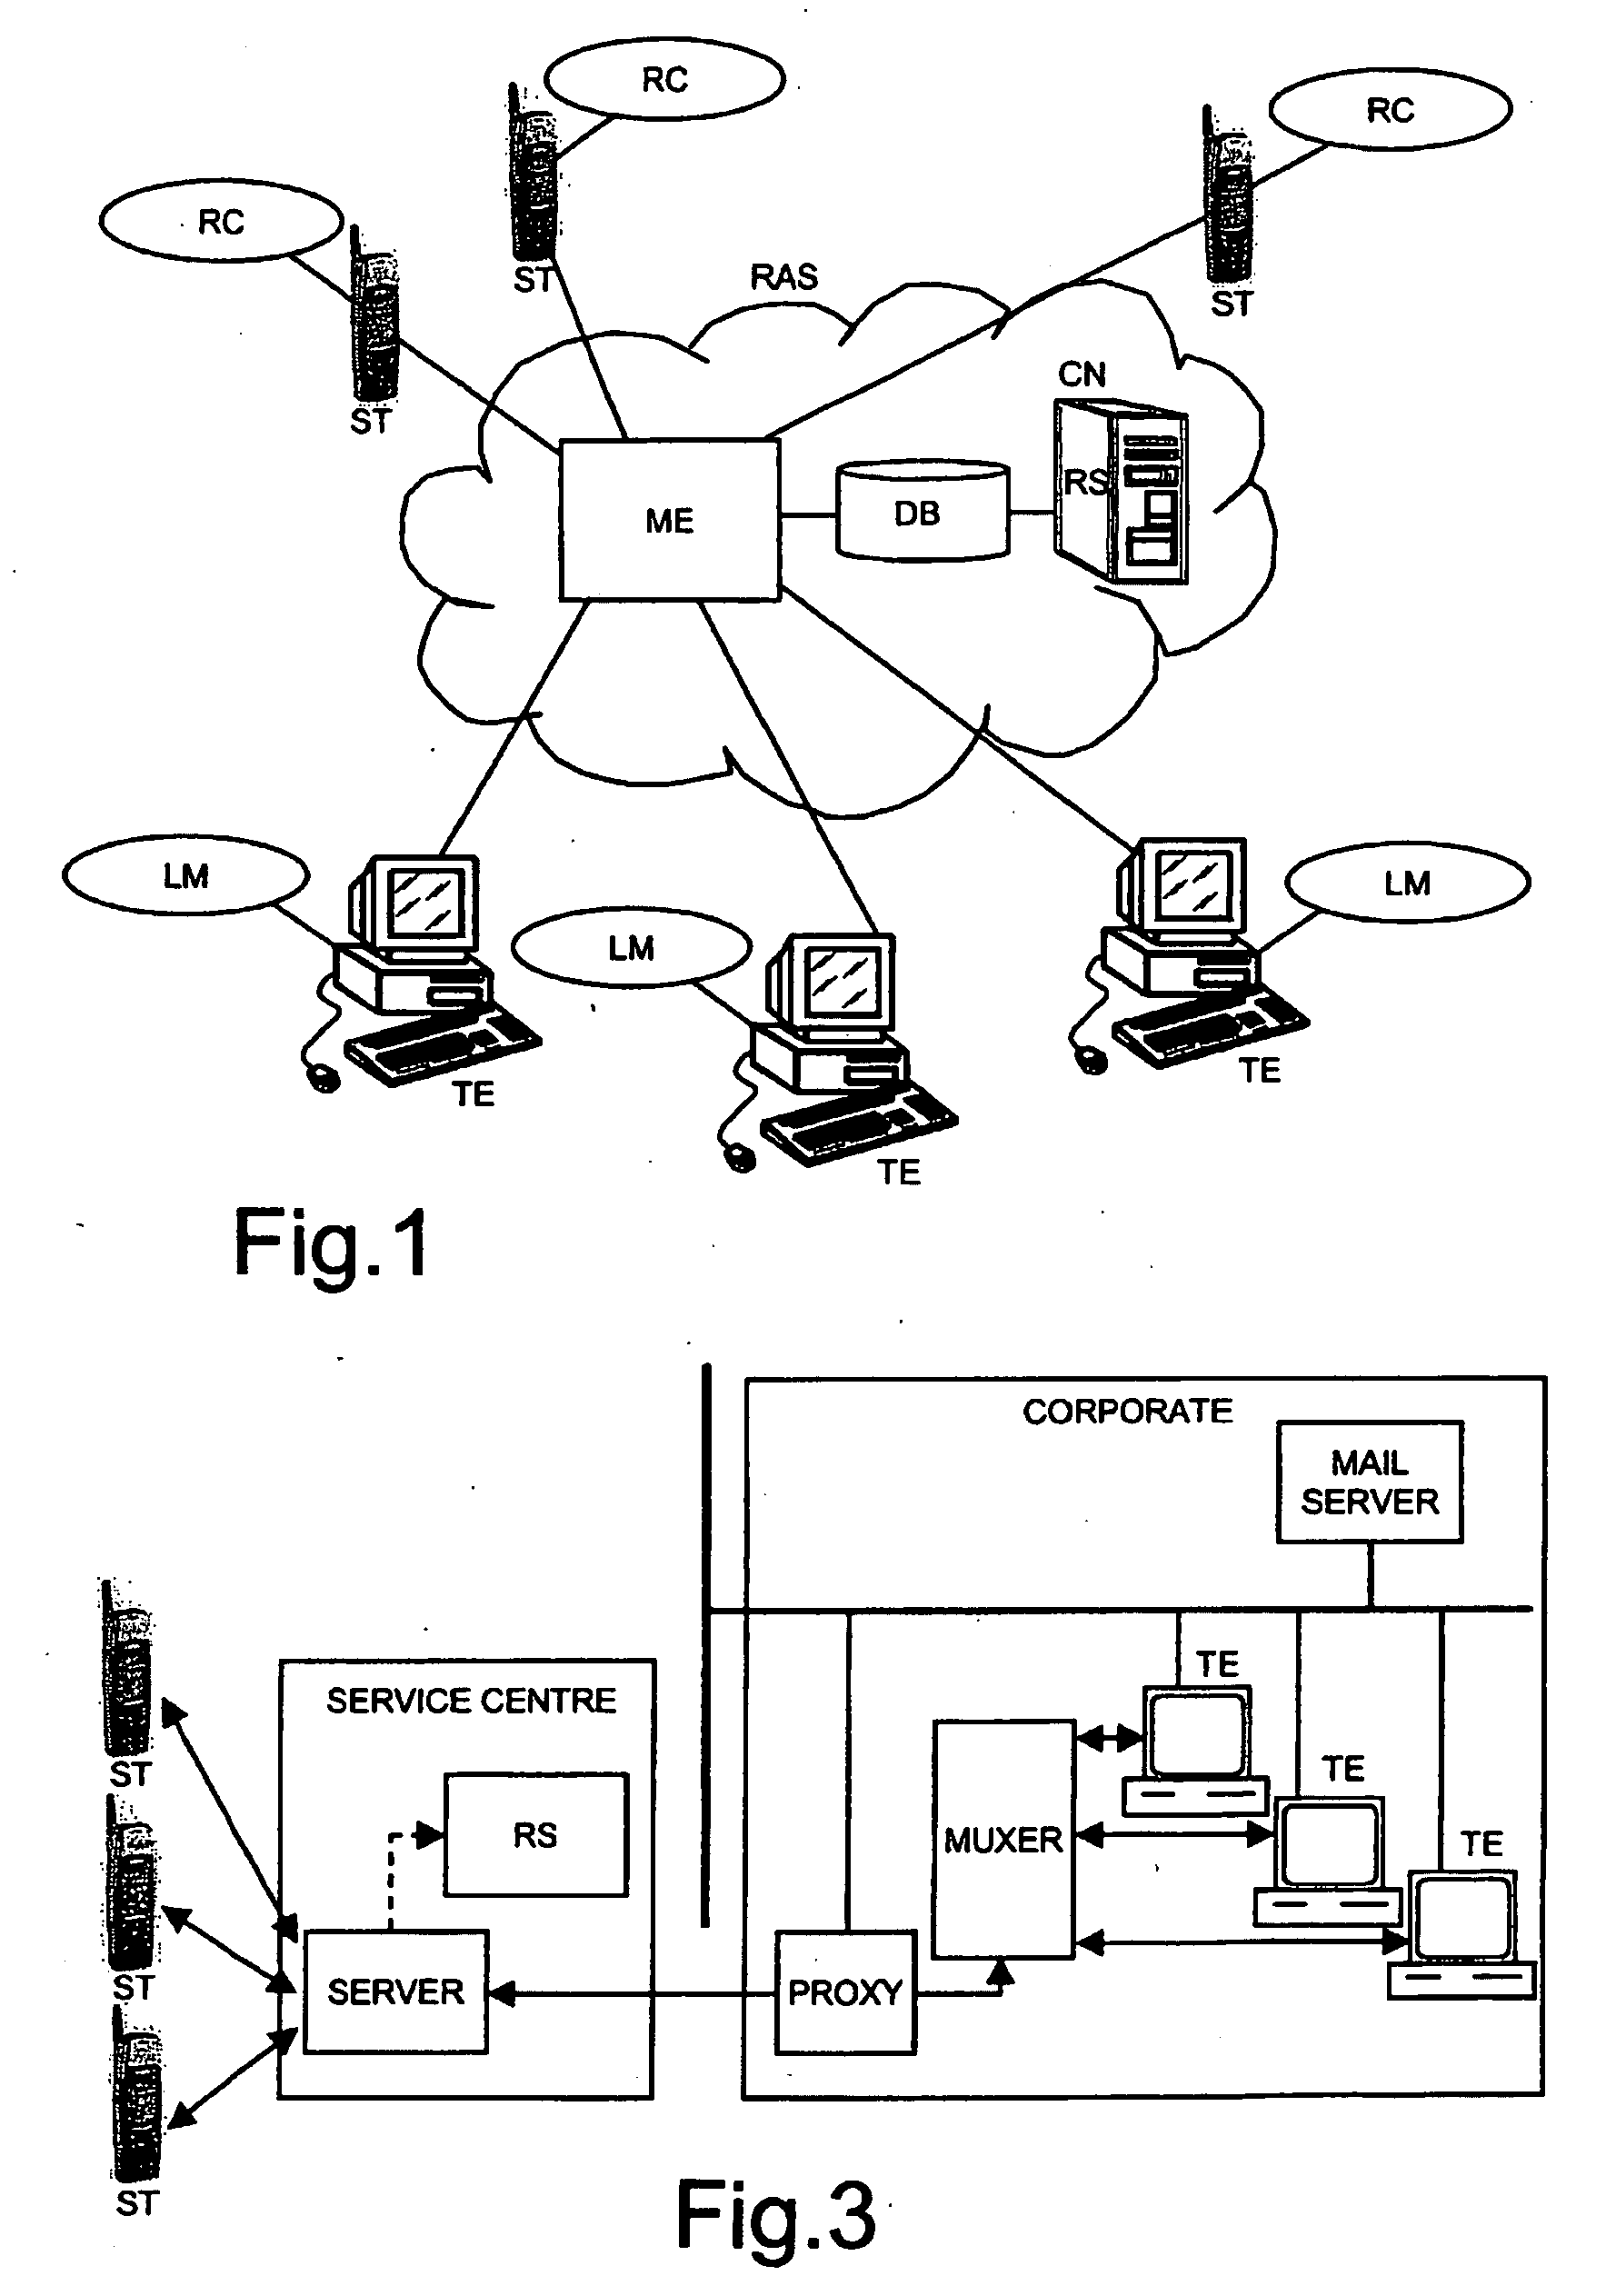 Remote Access System and Method for Enabling a User to Remotely Access Terminal Equipment from a Subscriber Terminal